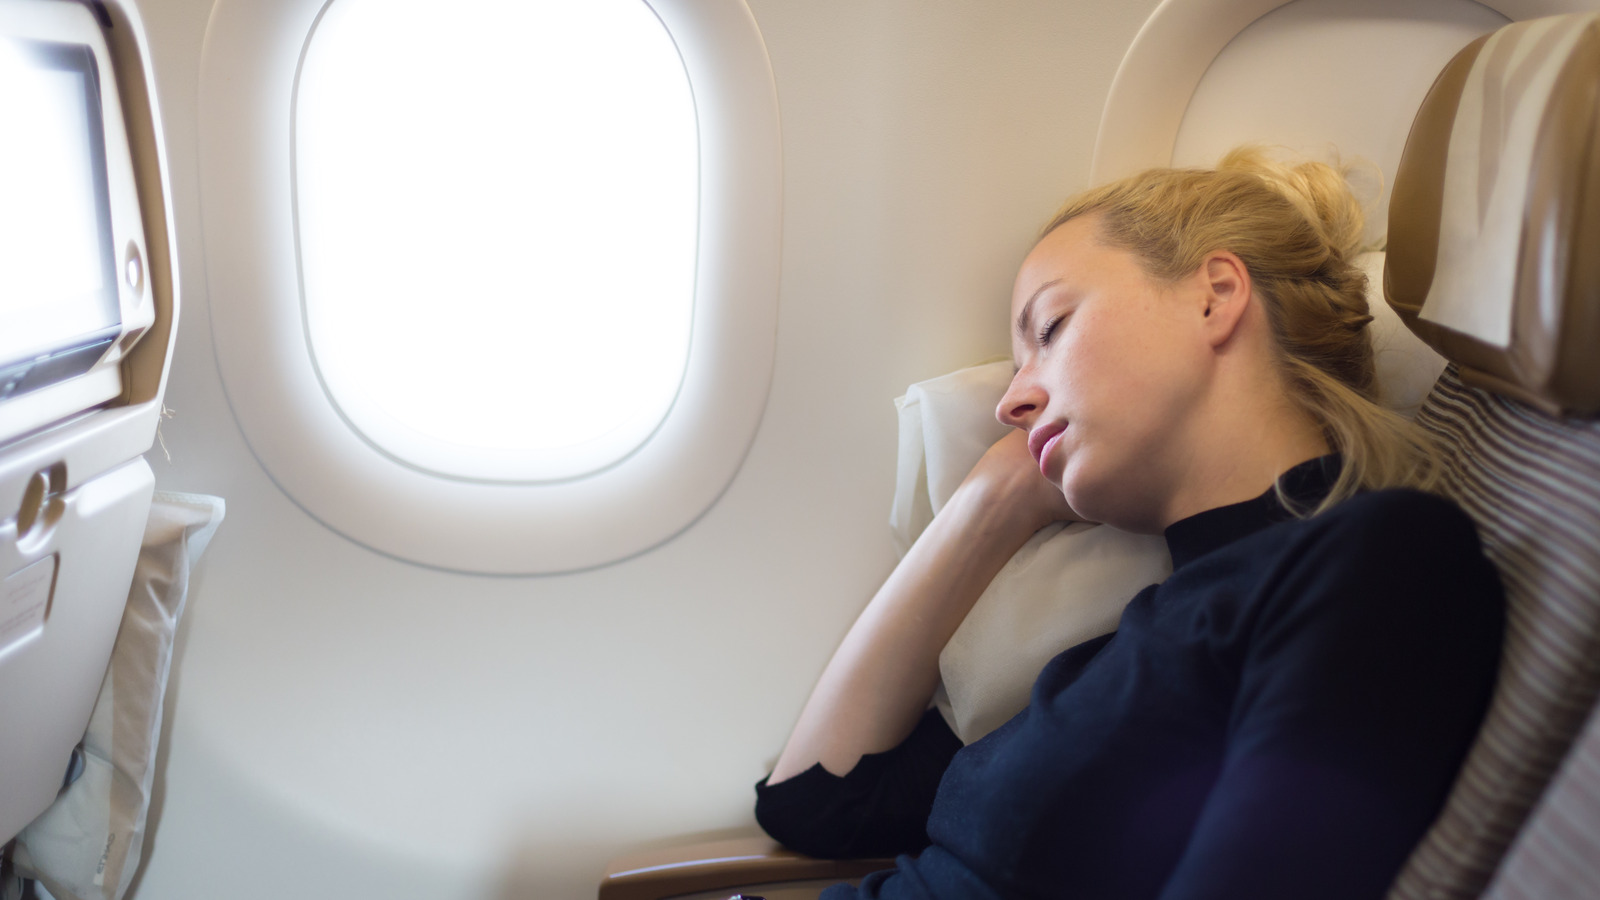 How to Lift the Armrest on Your Airplane Seat